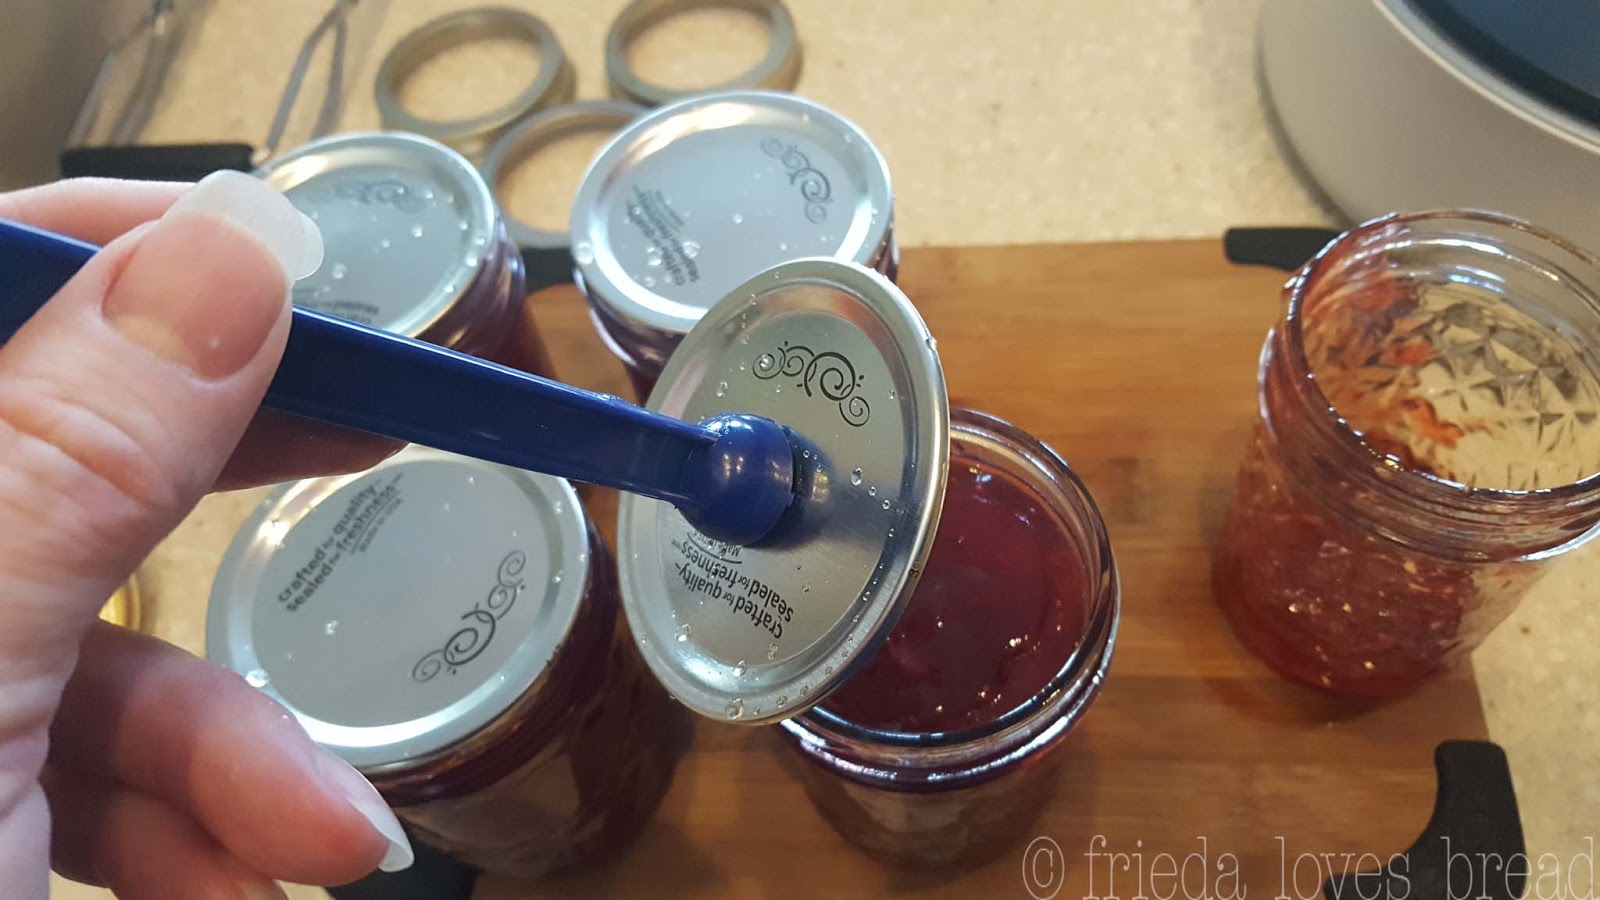 Home Canning with an Instant Pot? — Heritage Home Ec